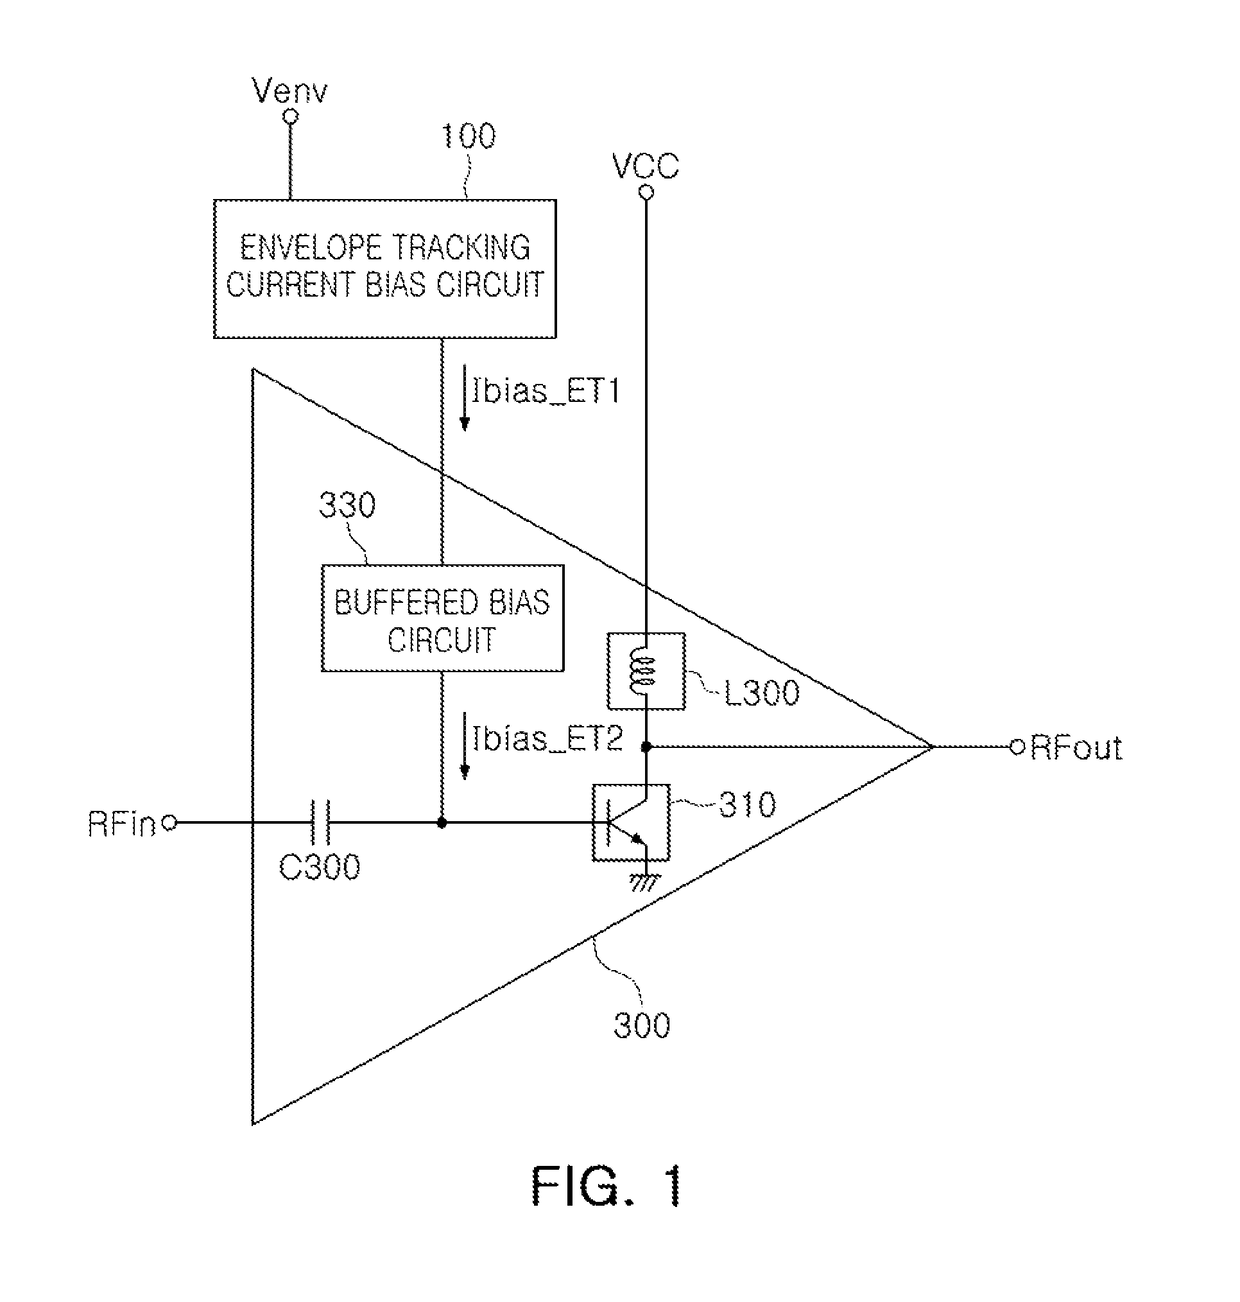 Envelope tracking current bias circuit and power amplifier apparatus